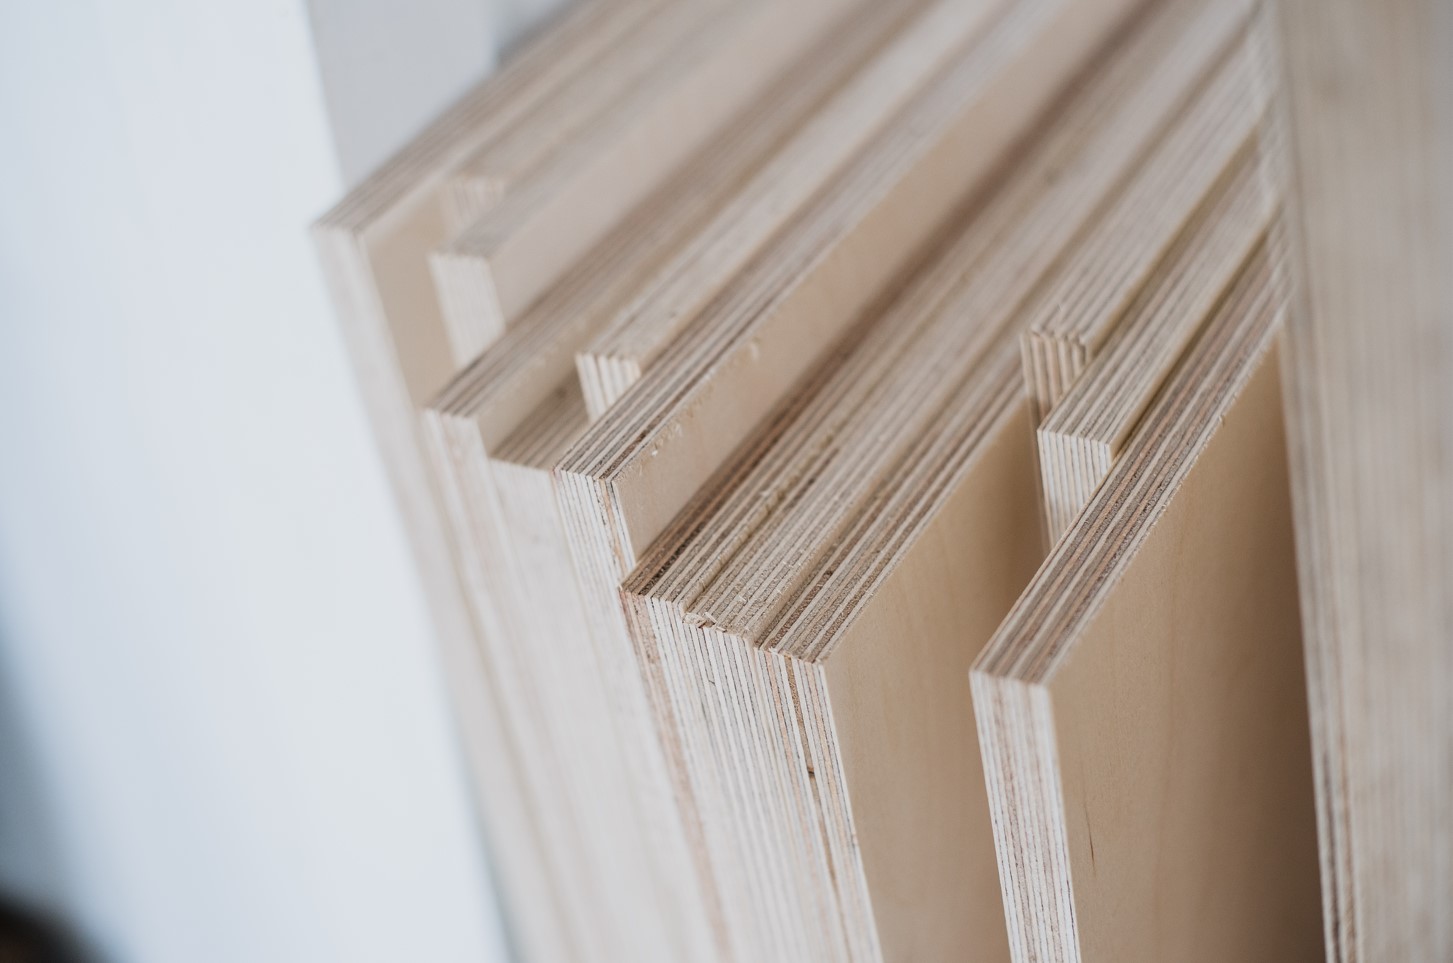 Plywood cabinets are made from thin layers of wood pressed together with glue